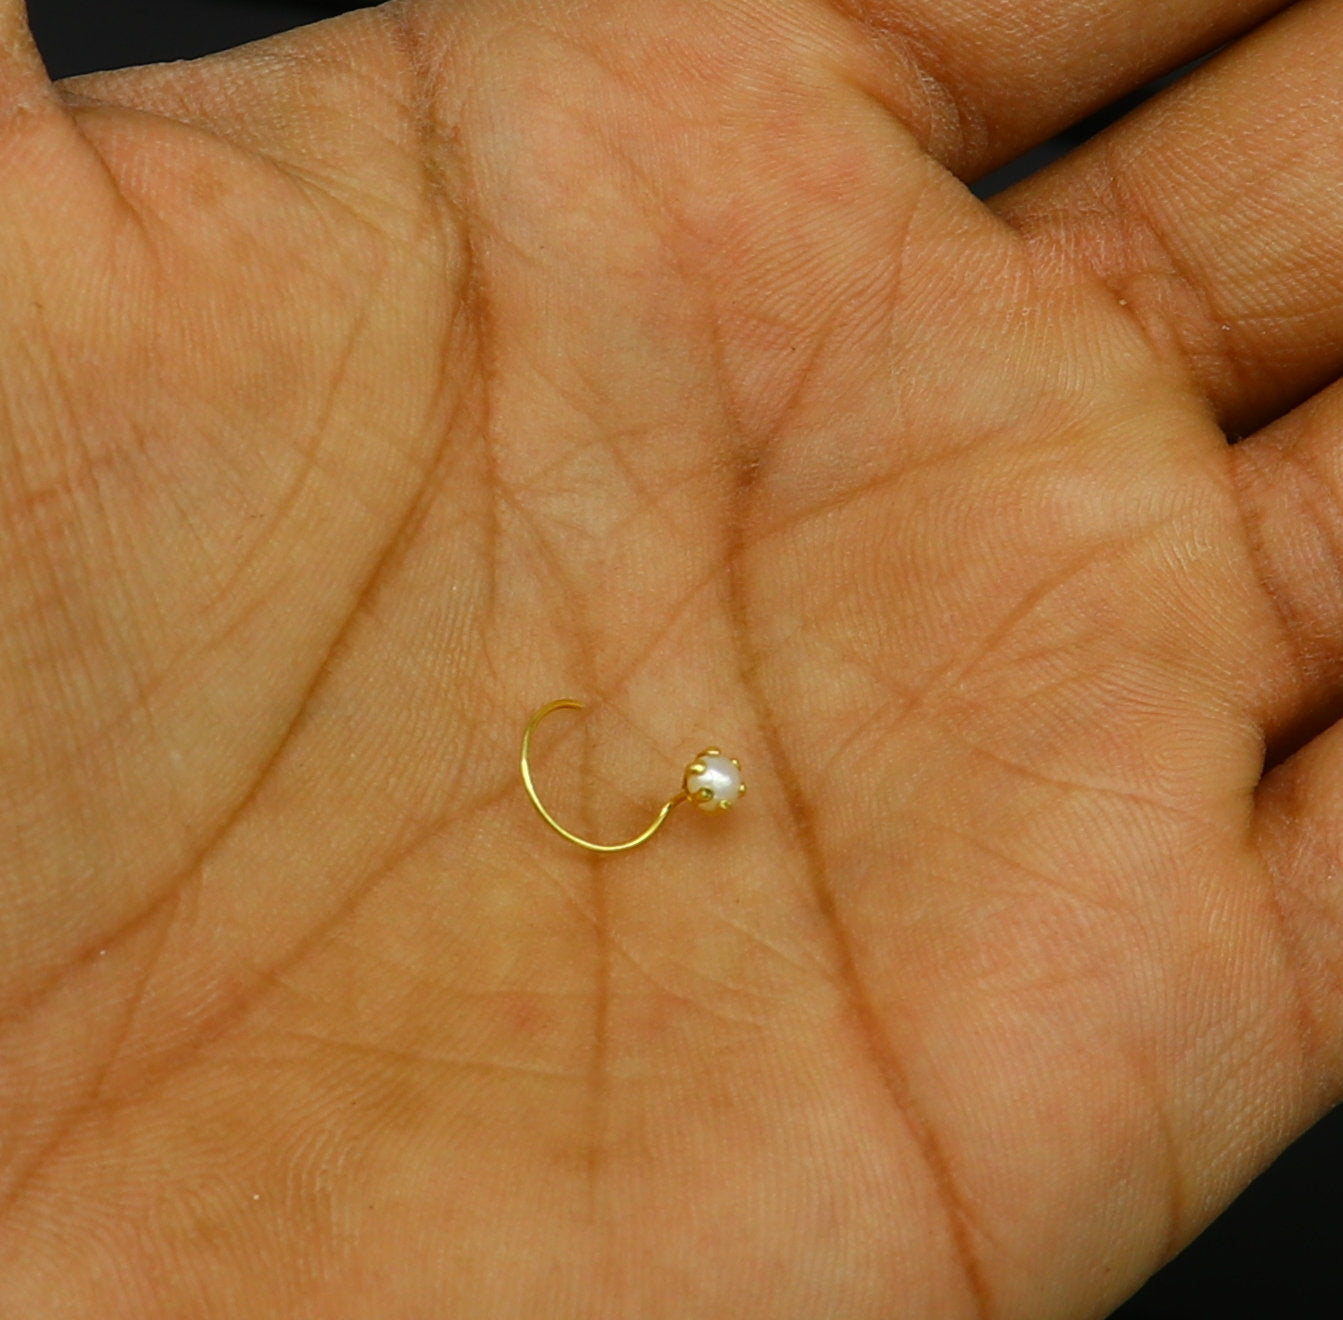 20 Gauge Fresh Water Pearl L-Shape Stud Nose Ring in 14K Yellow Gold - 3mm  | eBay